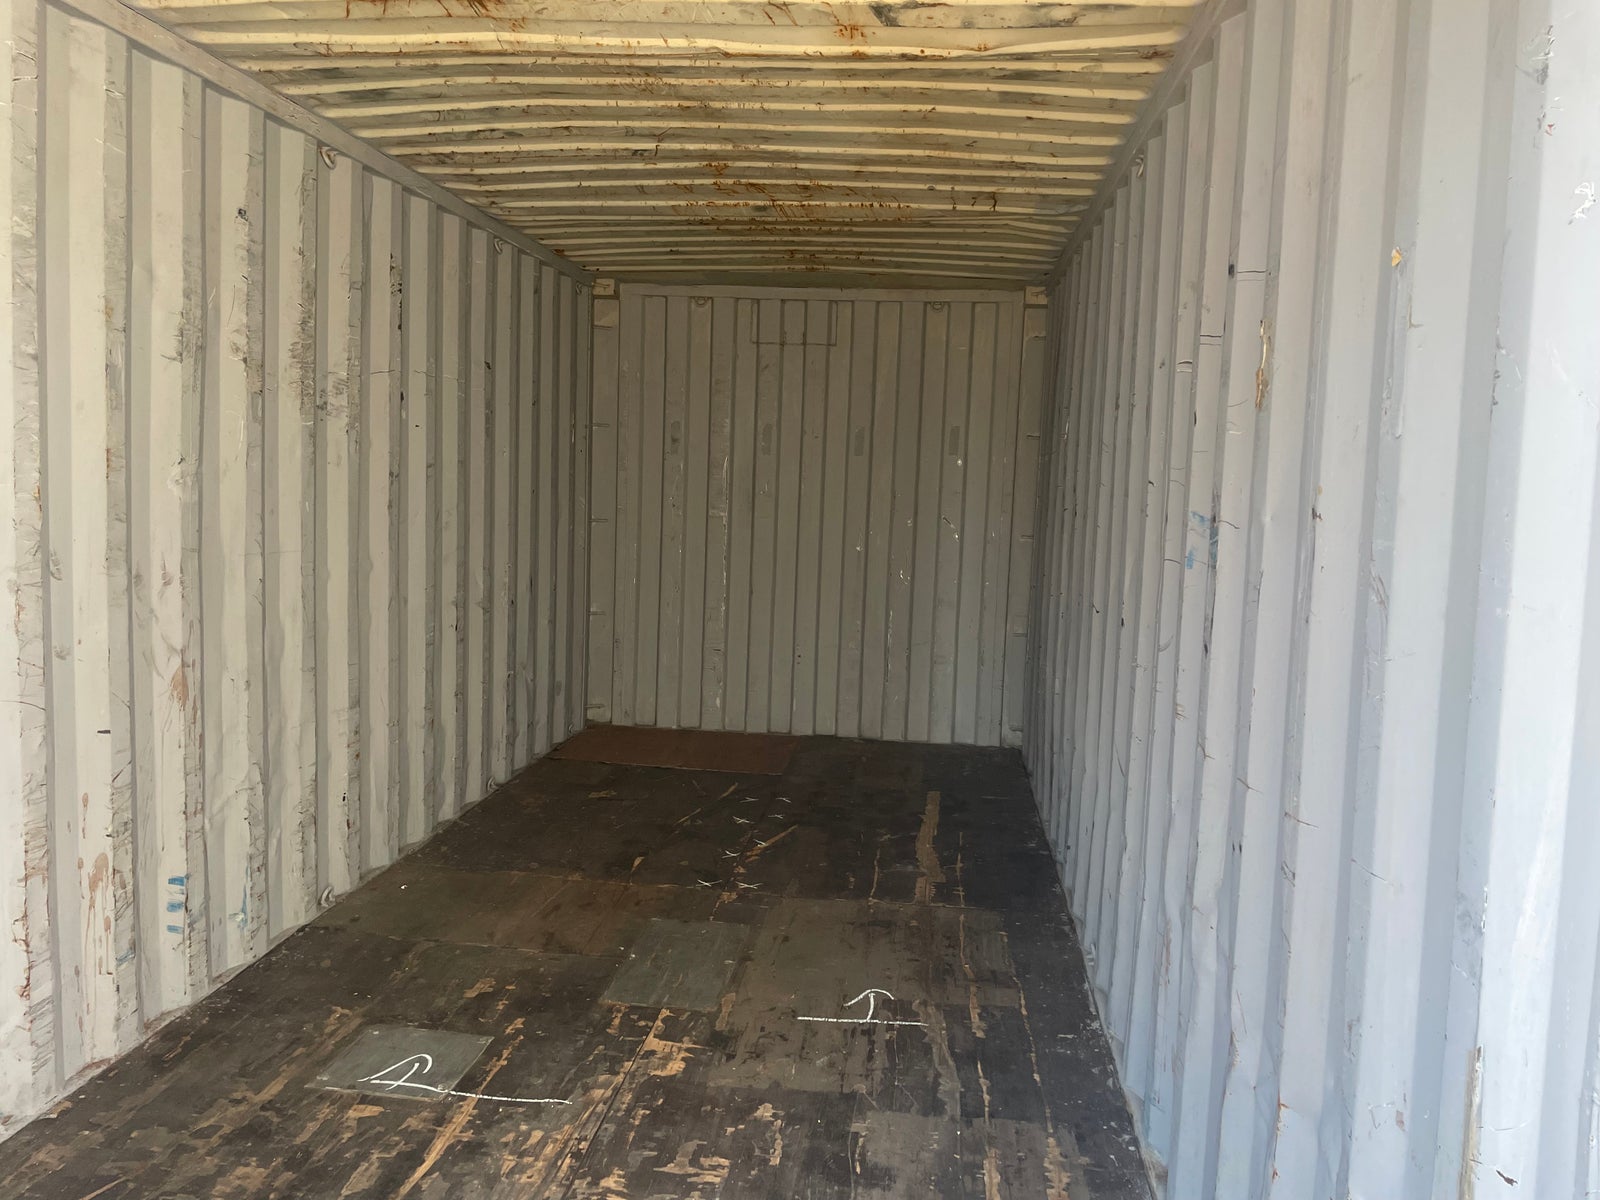 20 fods Container- ID: ASIU 018860-8